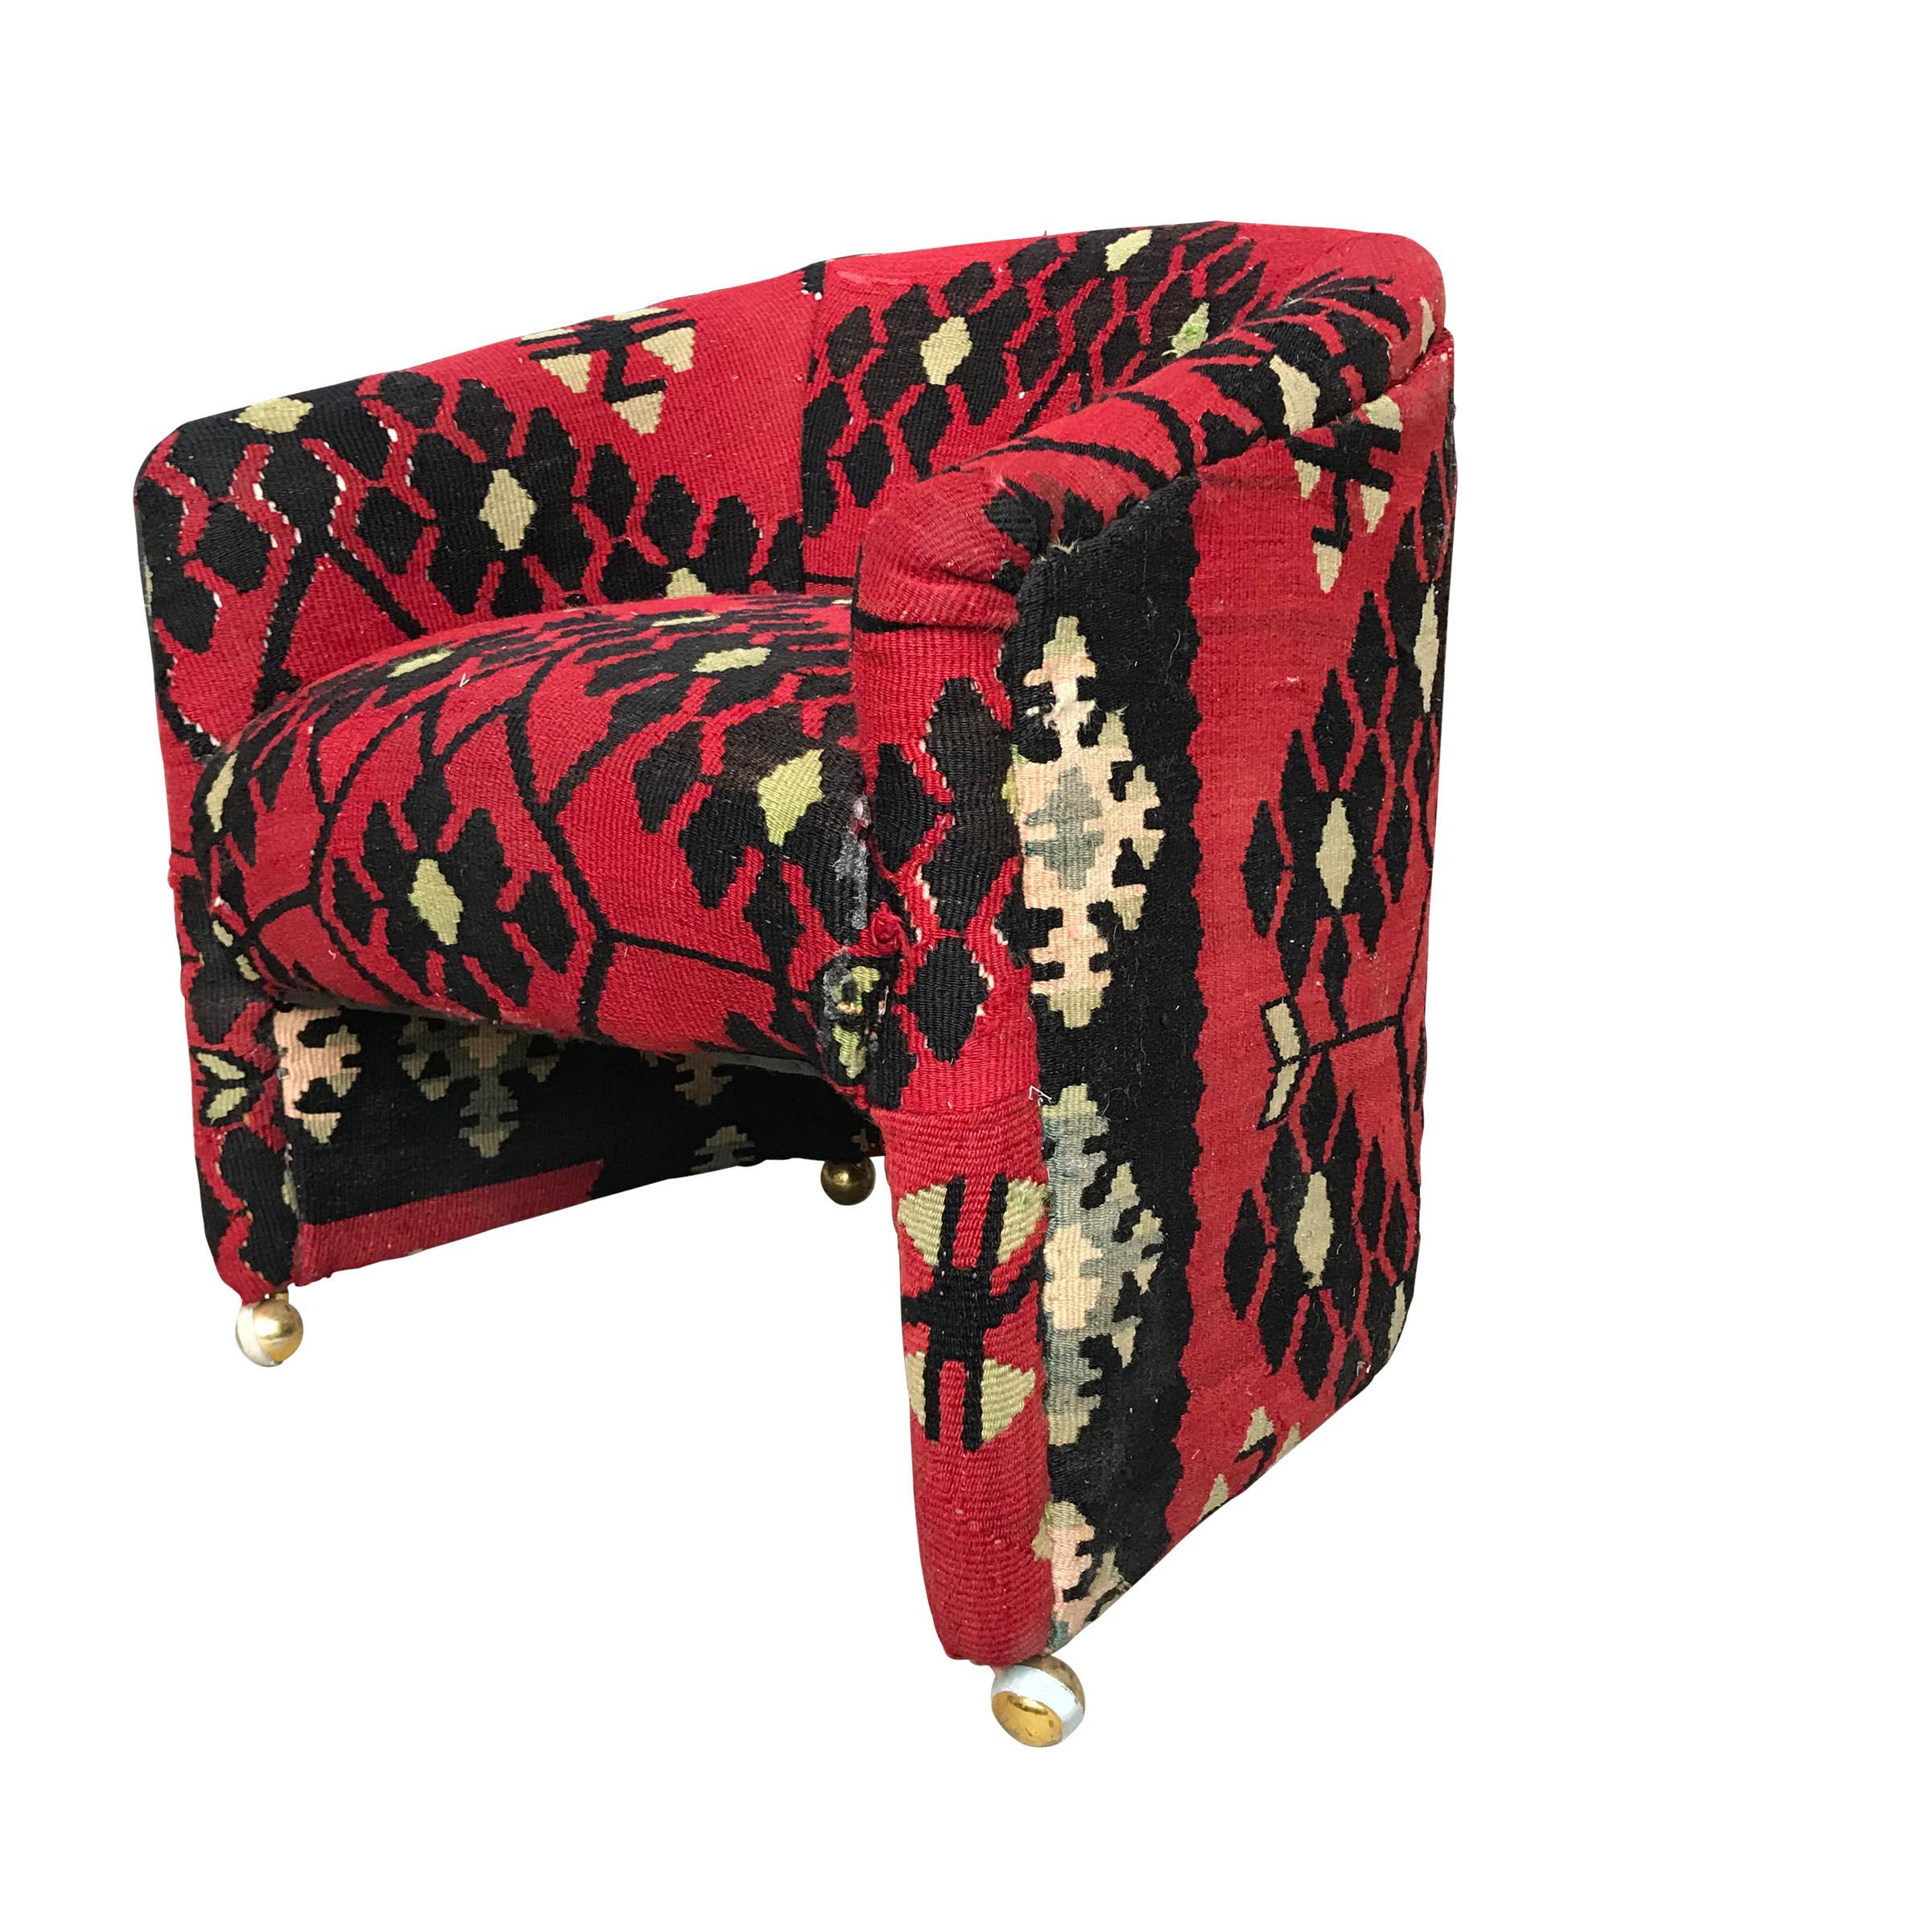 A wonderful mid-20th century American club chair upholstered in a vintage wool crimson, black, and gold Kilim rug. The chair sits on its original brass casters.